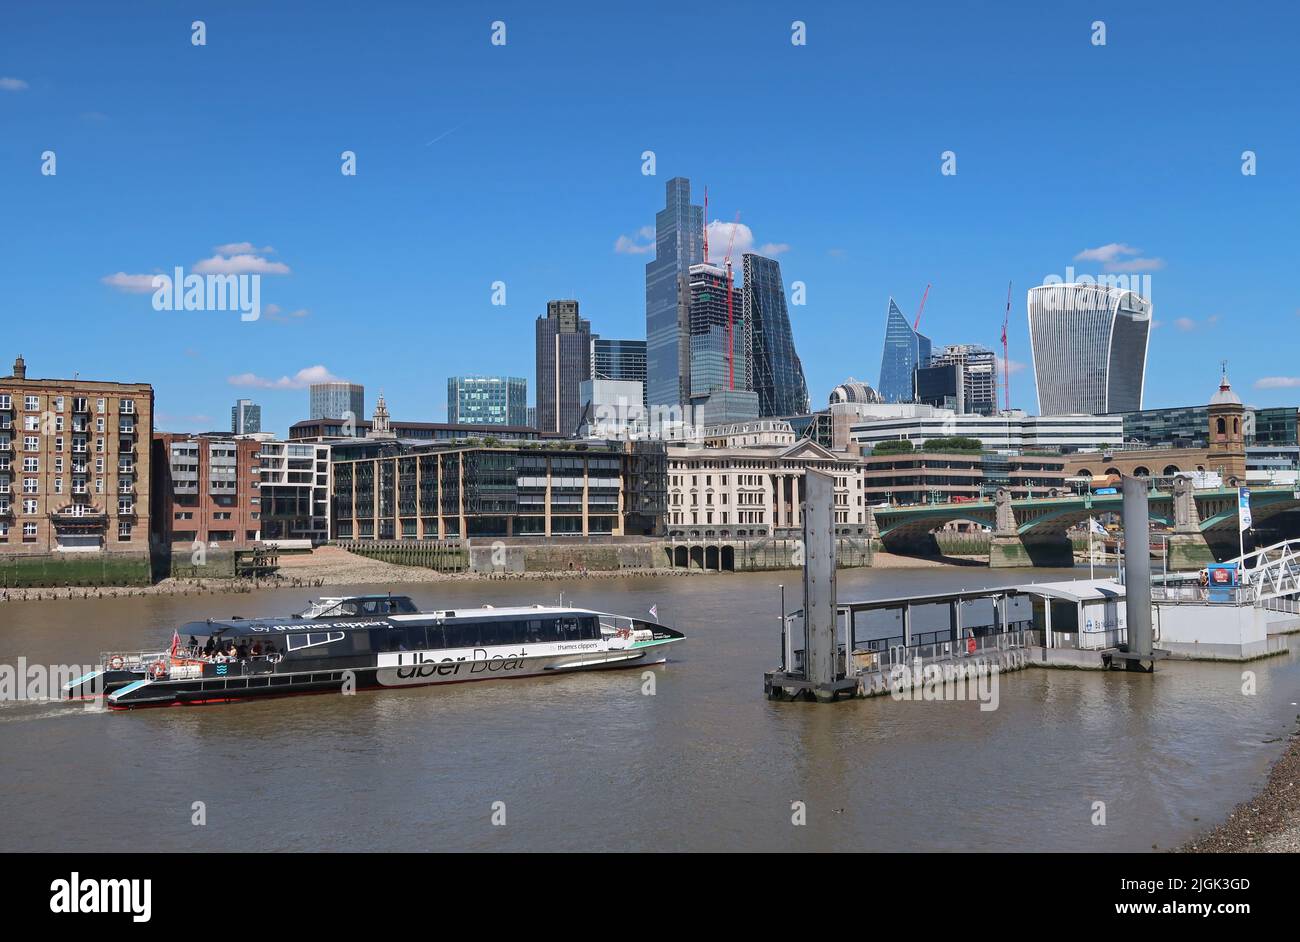 An Uber river boat arrives at Bankside Pier on the south bank of the River Thames. City of London skyline beyond. Stock Photo